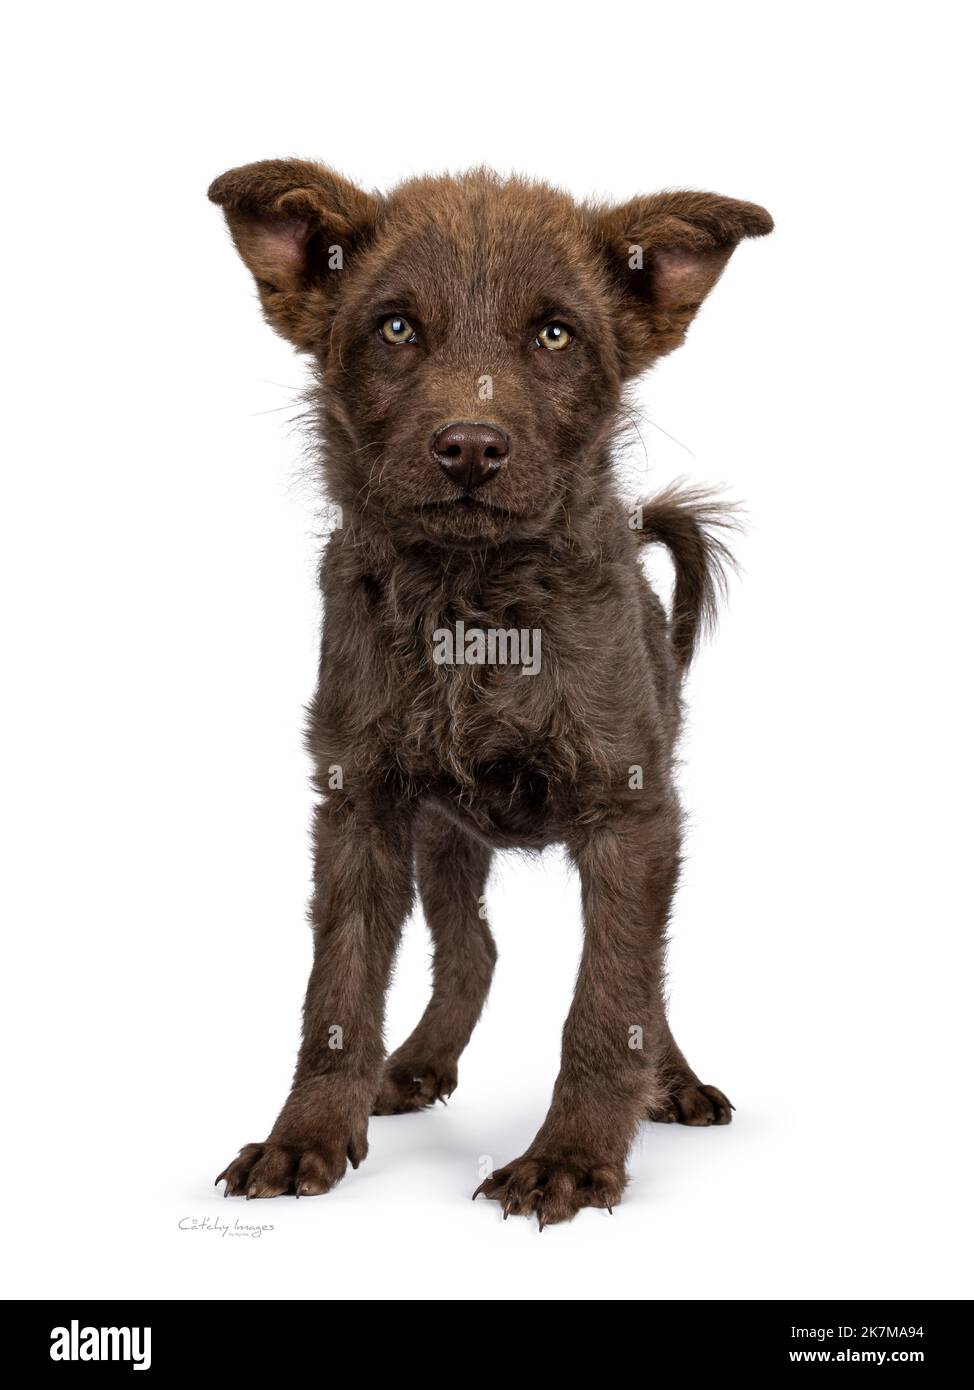 Liver colored German Shepherd dog puppy, standing facing front. Looking straight to camera with greenish eyes. isolated on a white background. Stock Photo